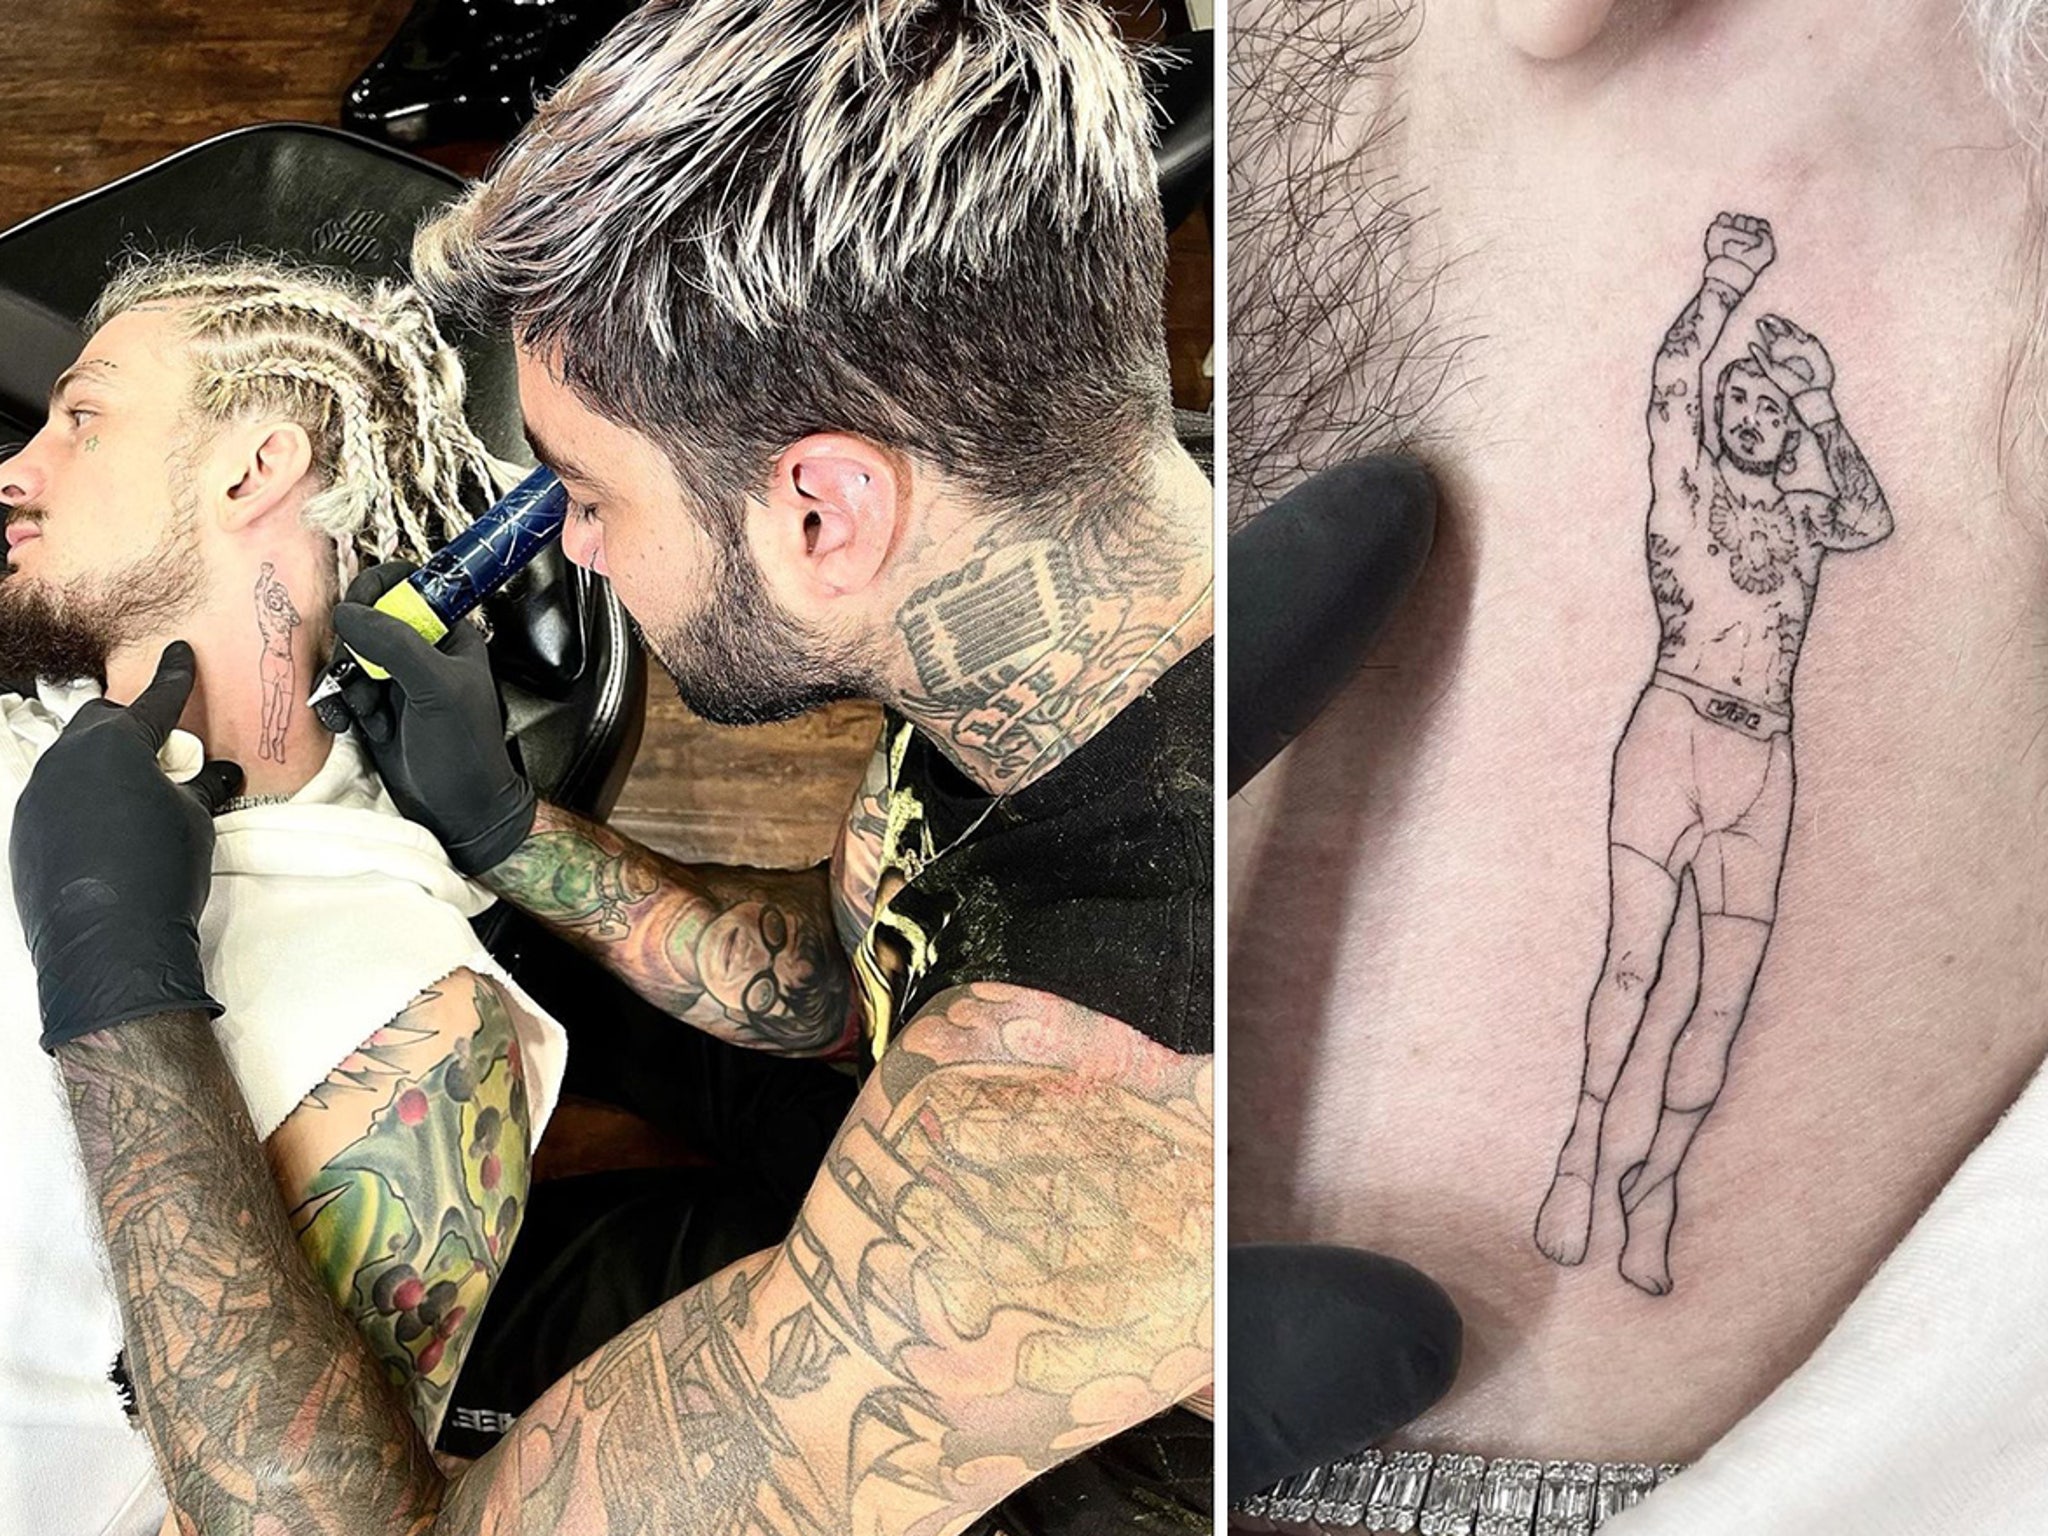 Sean OMalley gets a tattoo of himself on neck to celebrate jumpshot  victory pose  MMA Fighting